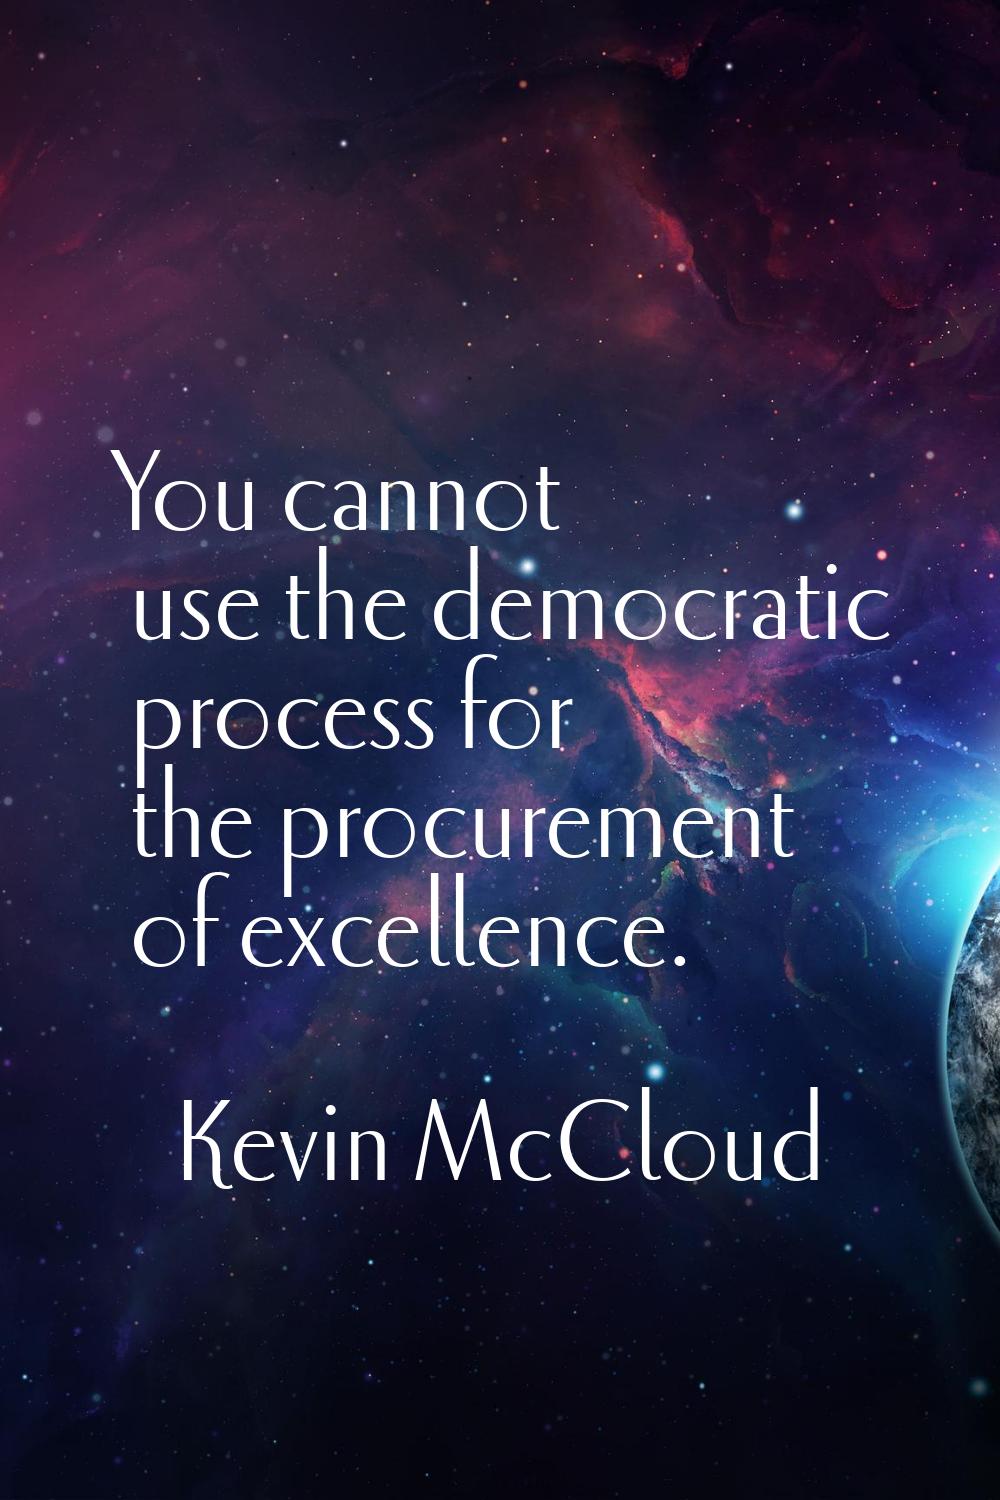 You cannot use the democratic process for the procurement of excellence.